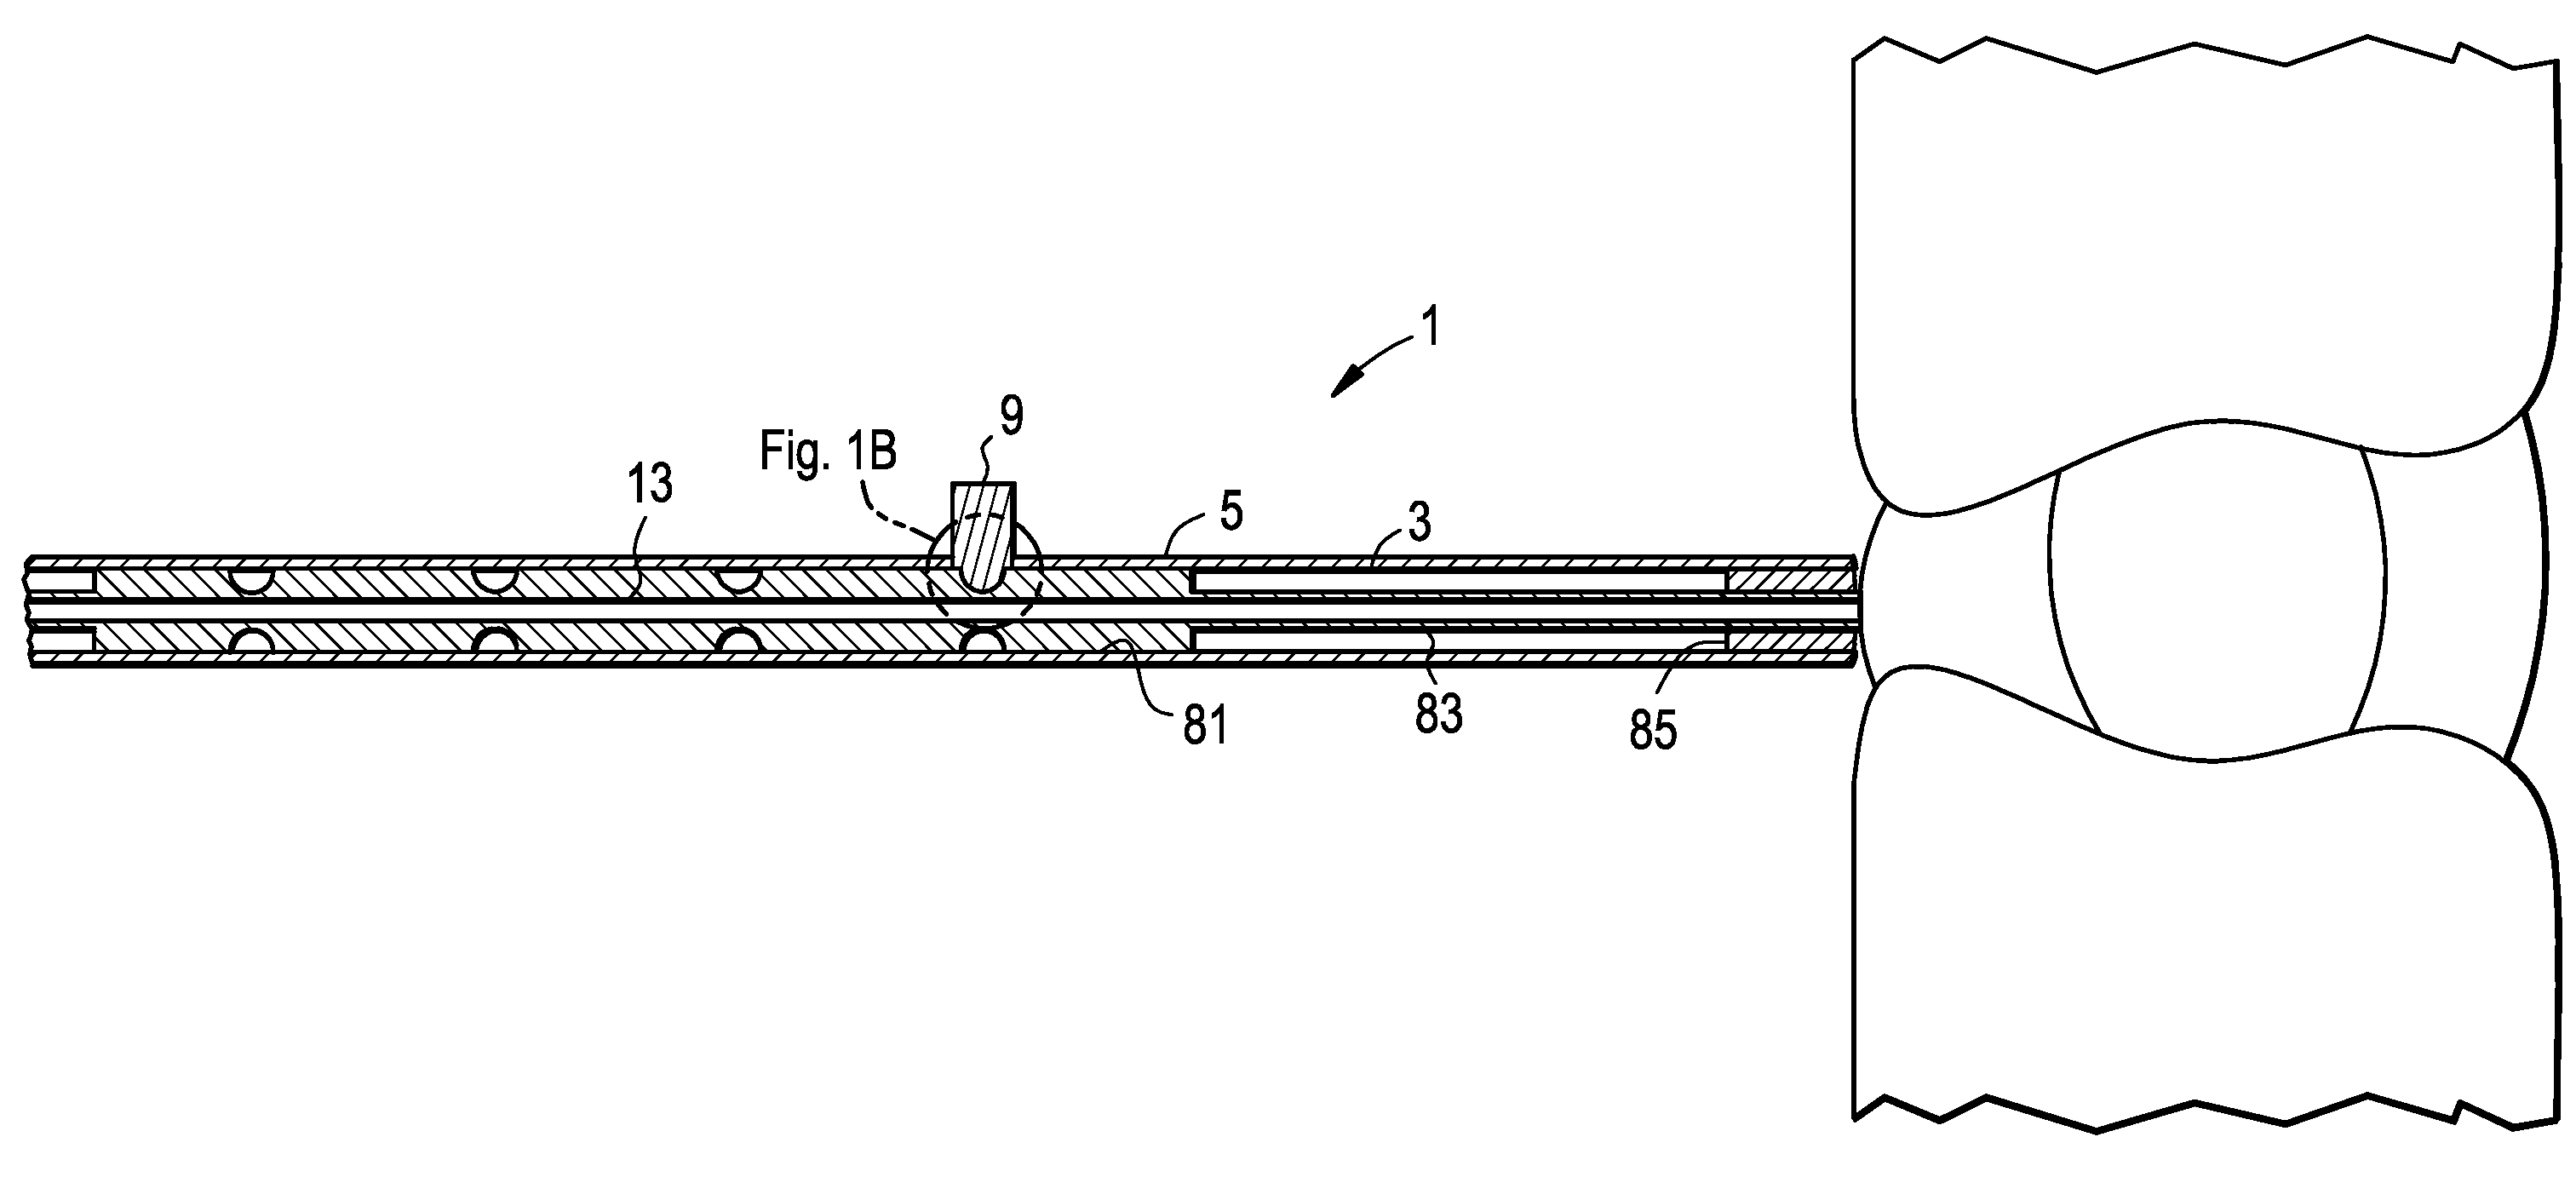 Intervertebral Disc Puncture and Treatment System